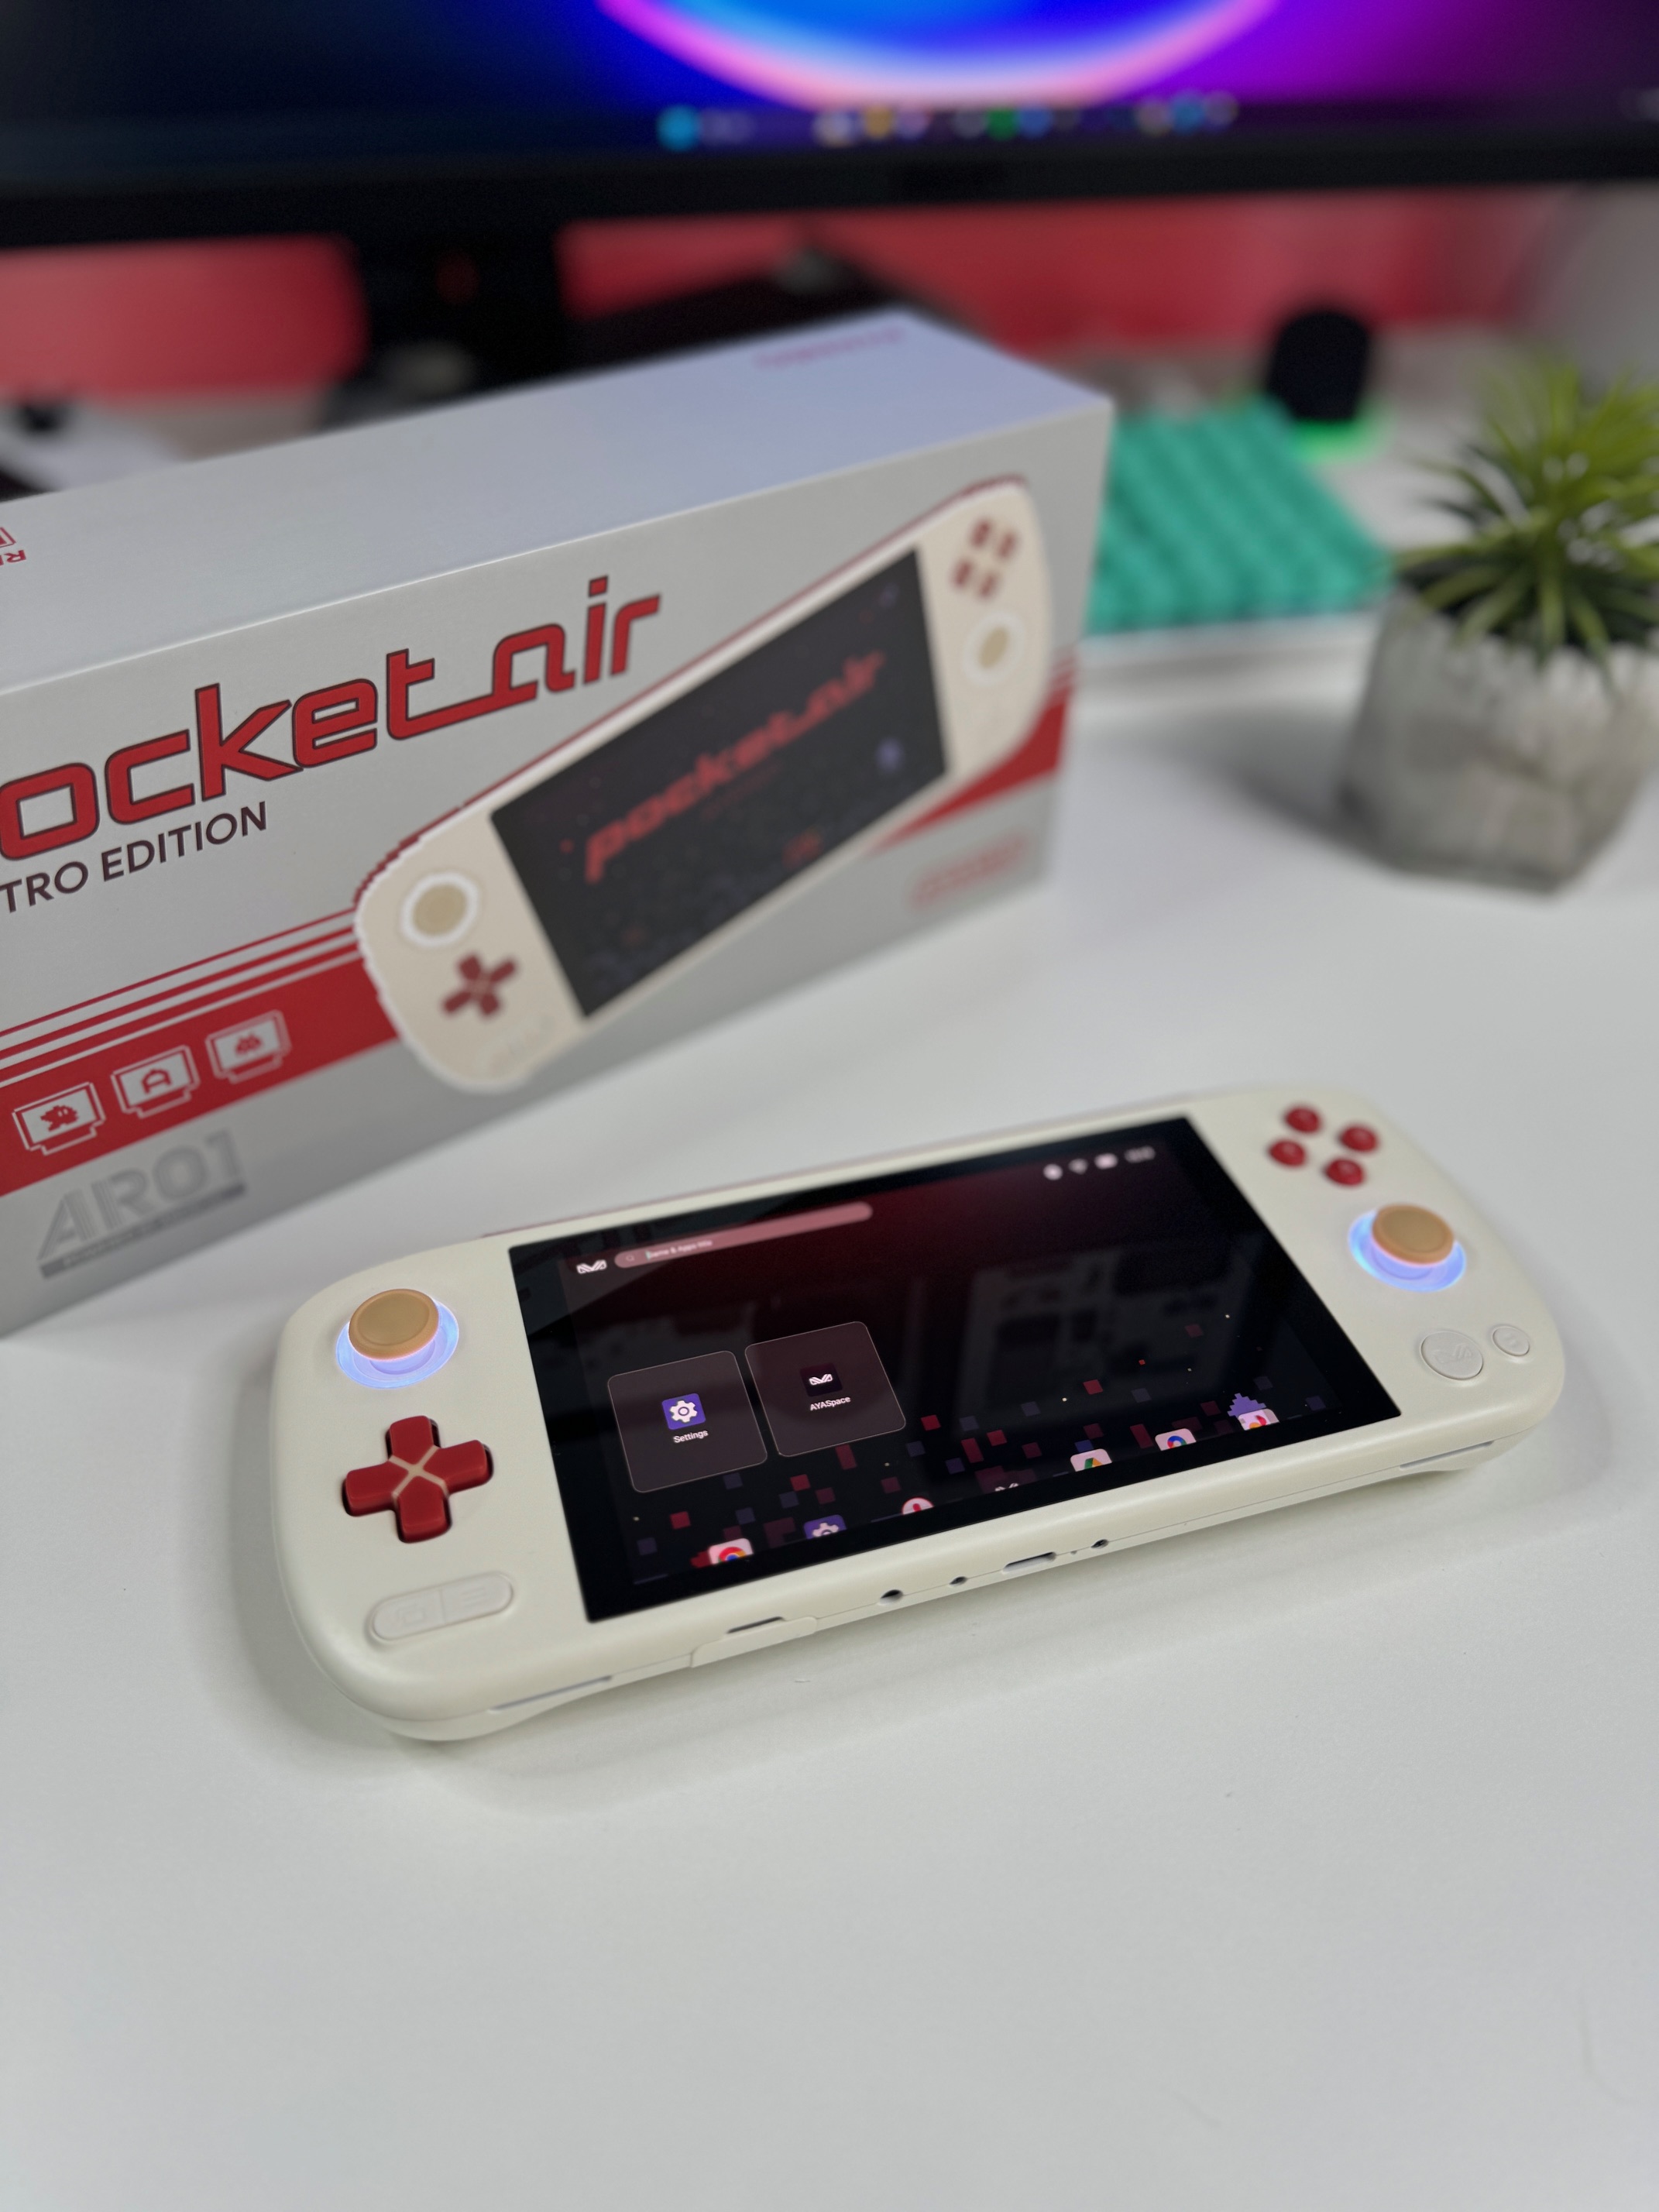 AYANEO Pocket Air Is Here!